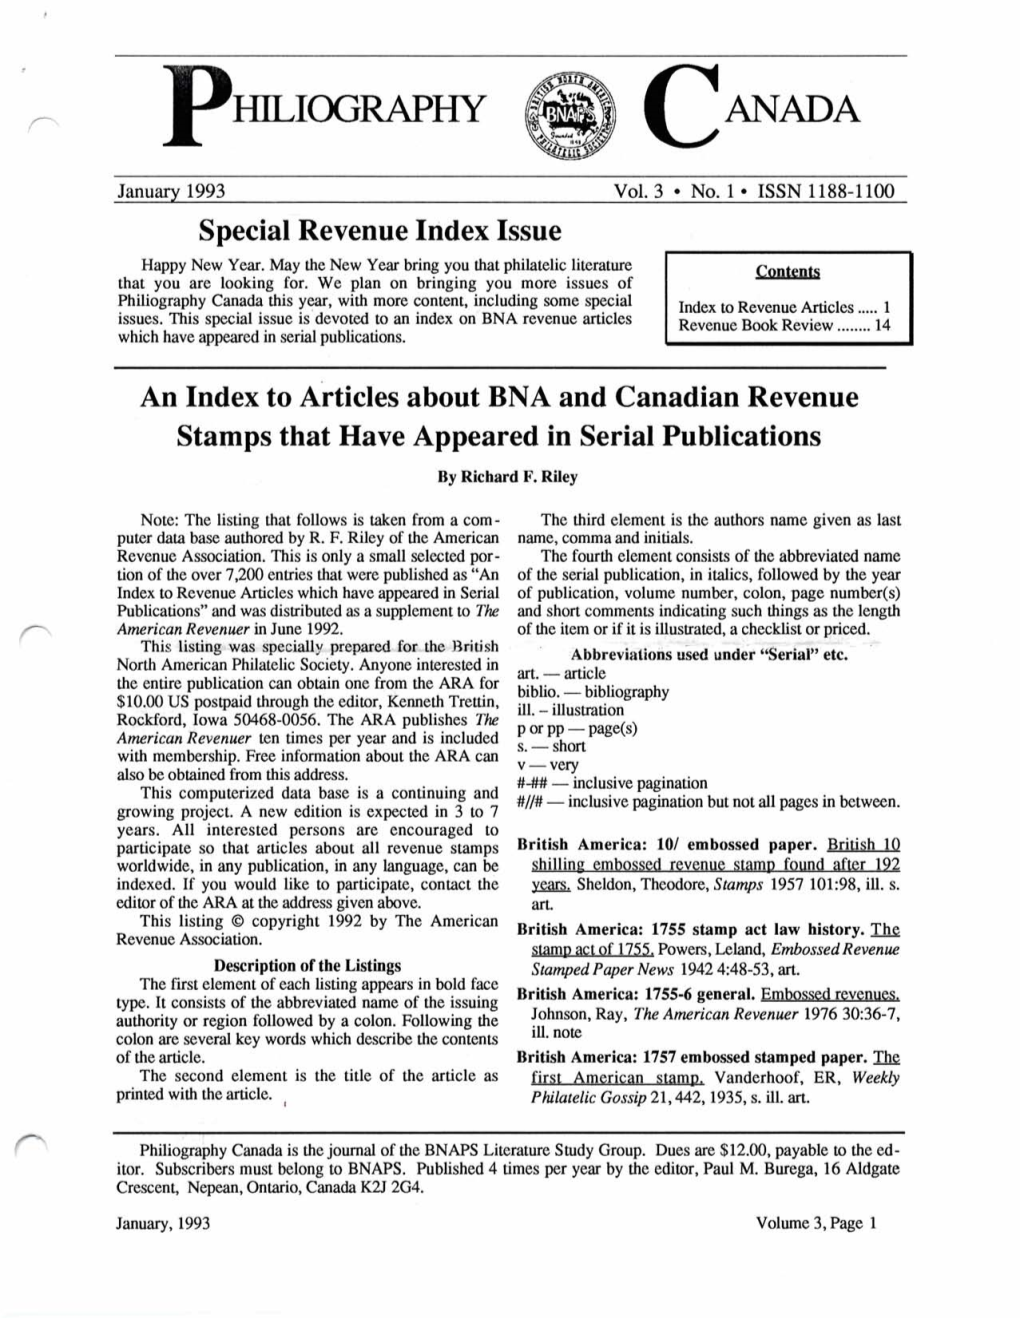 Special Revenue Index Issue an Index to Articles About BNA And